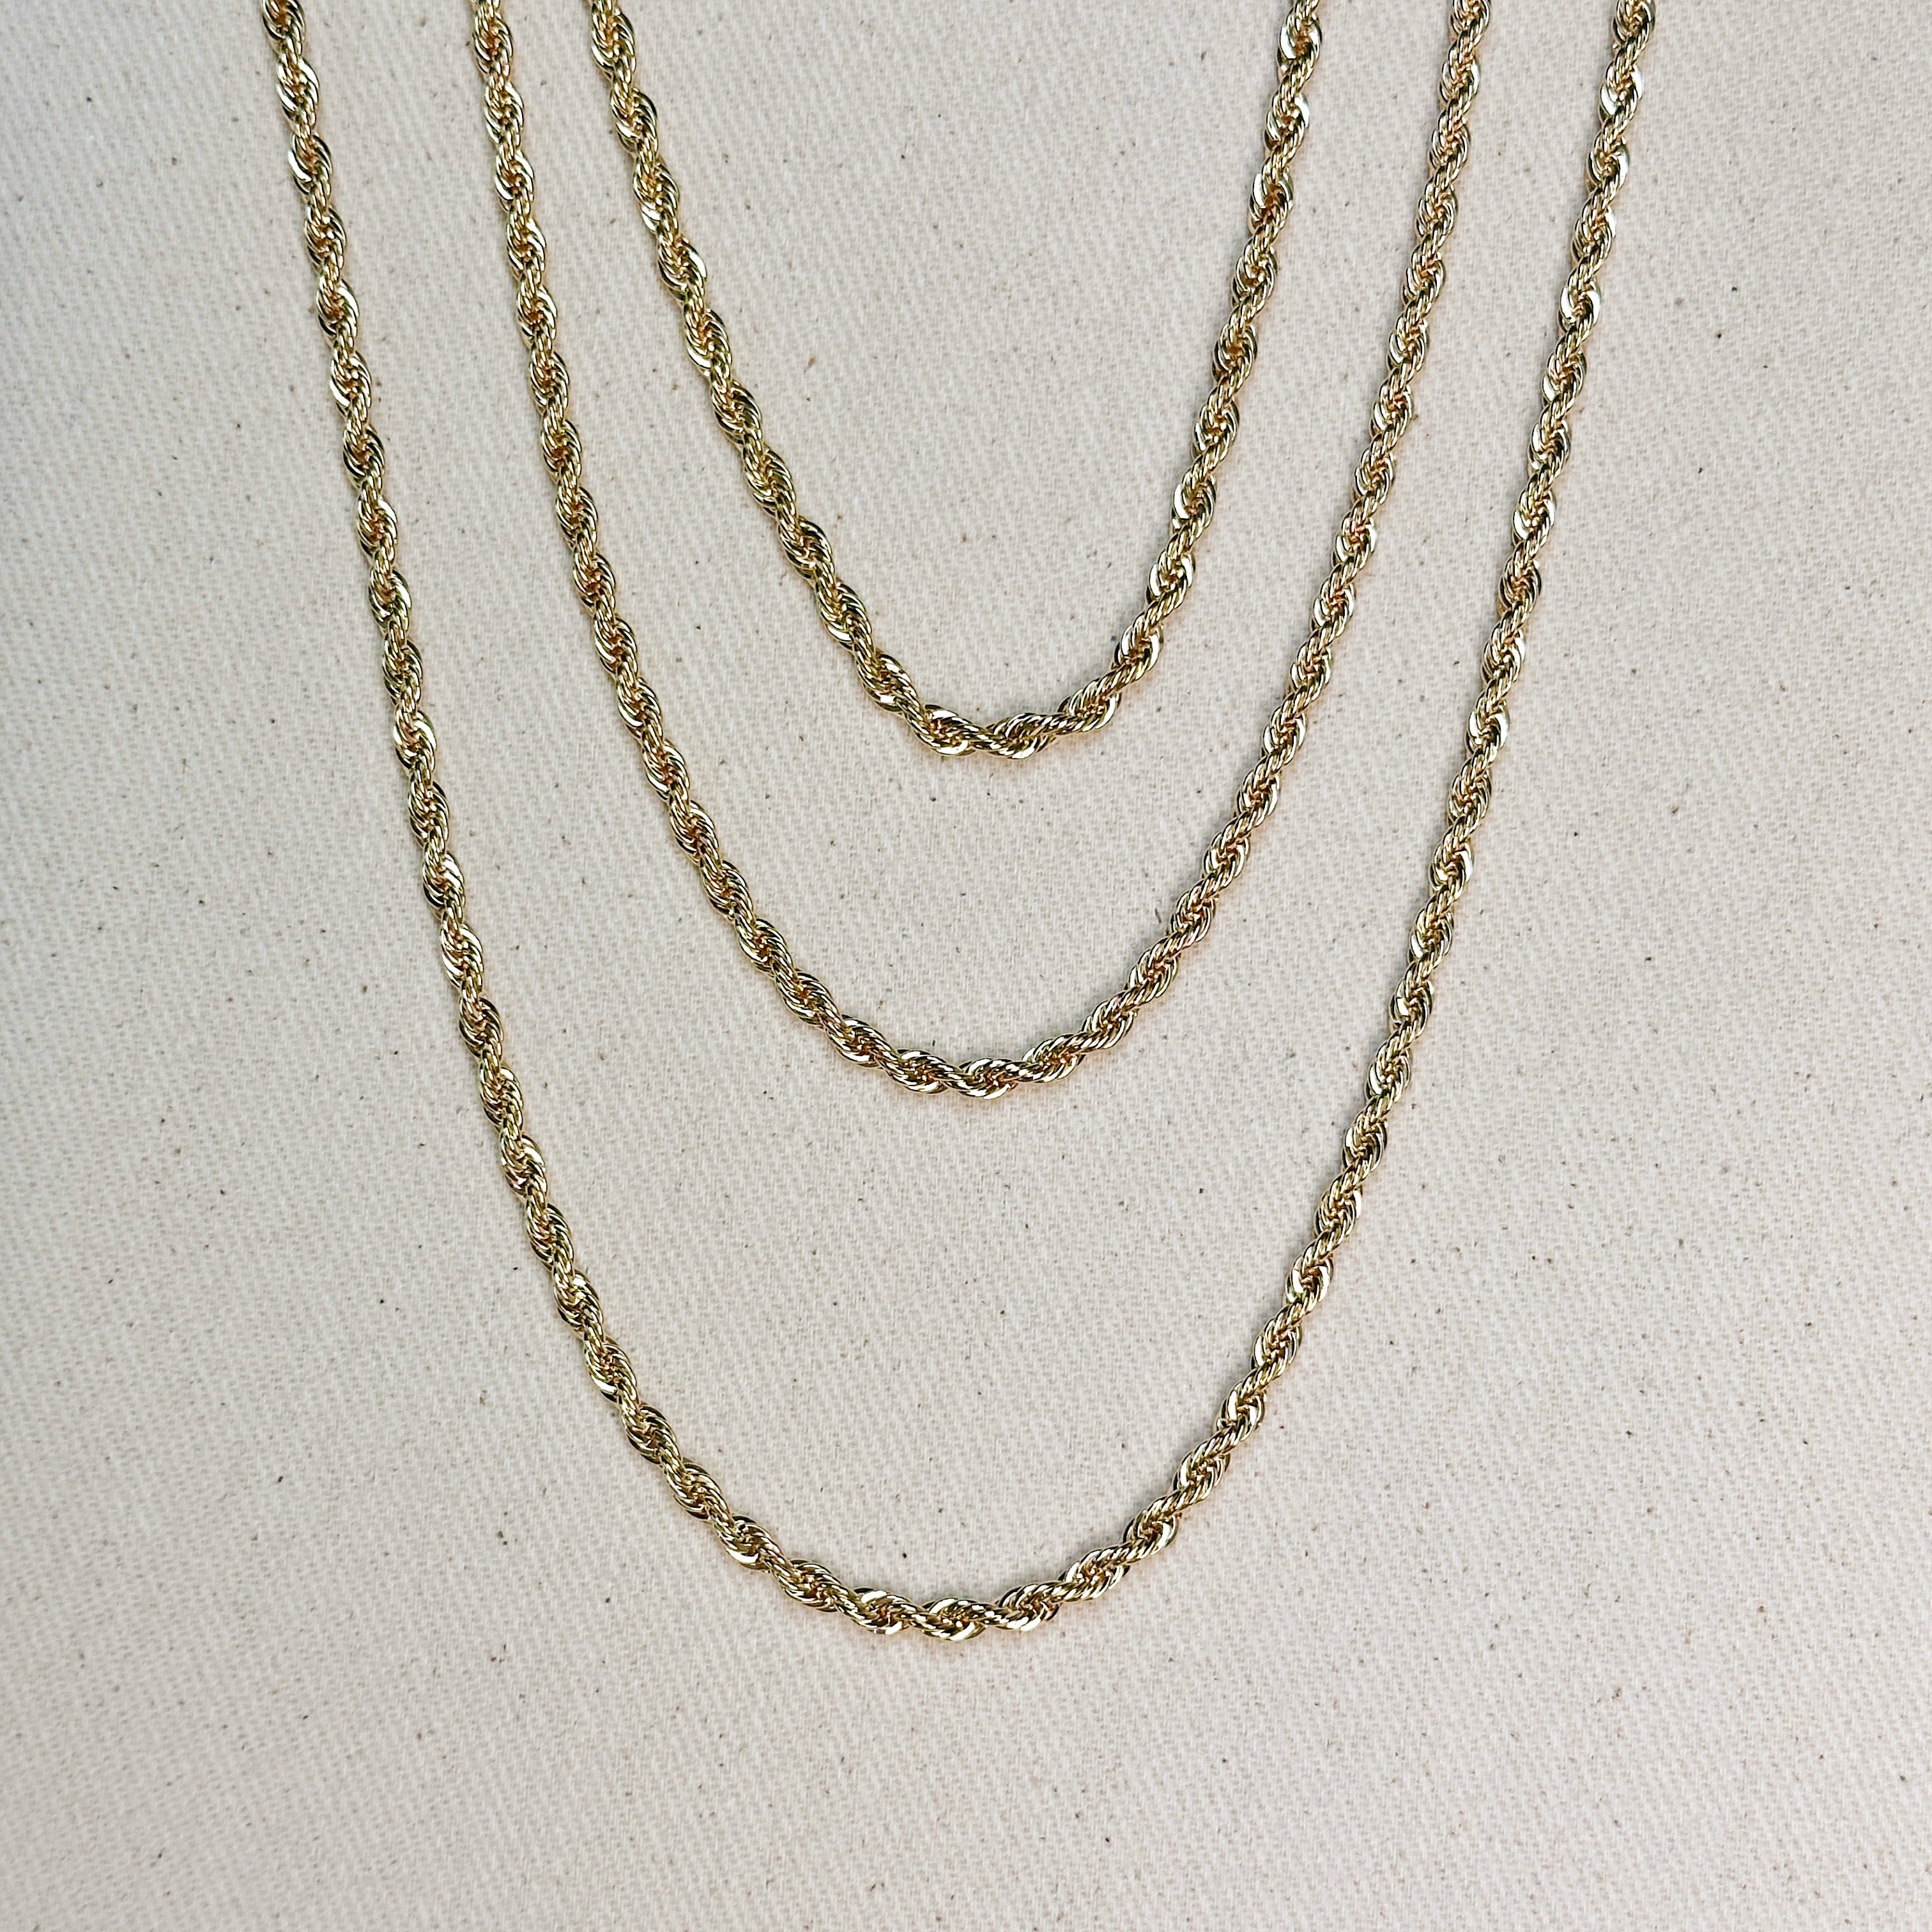 GoldFi Chain Necklaces Collection